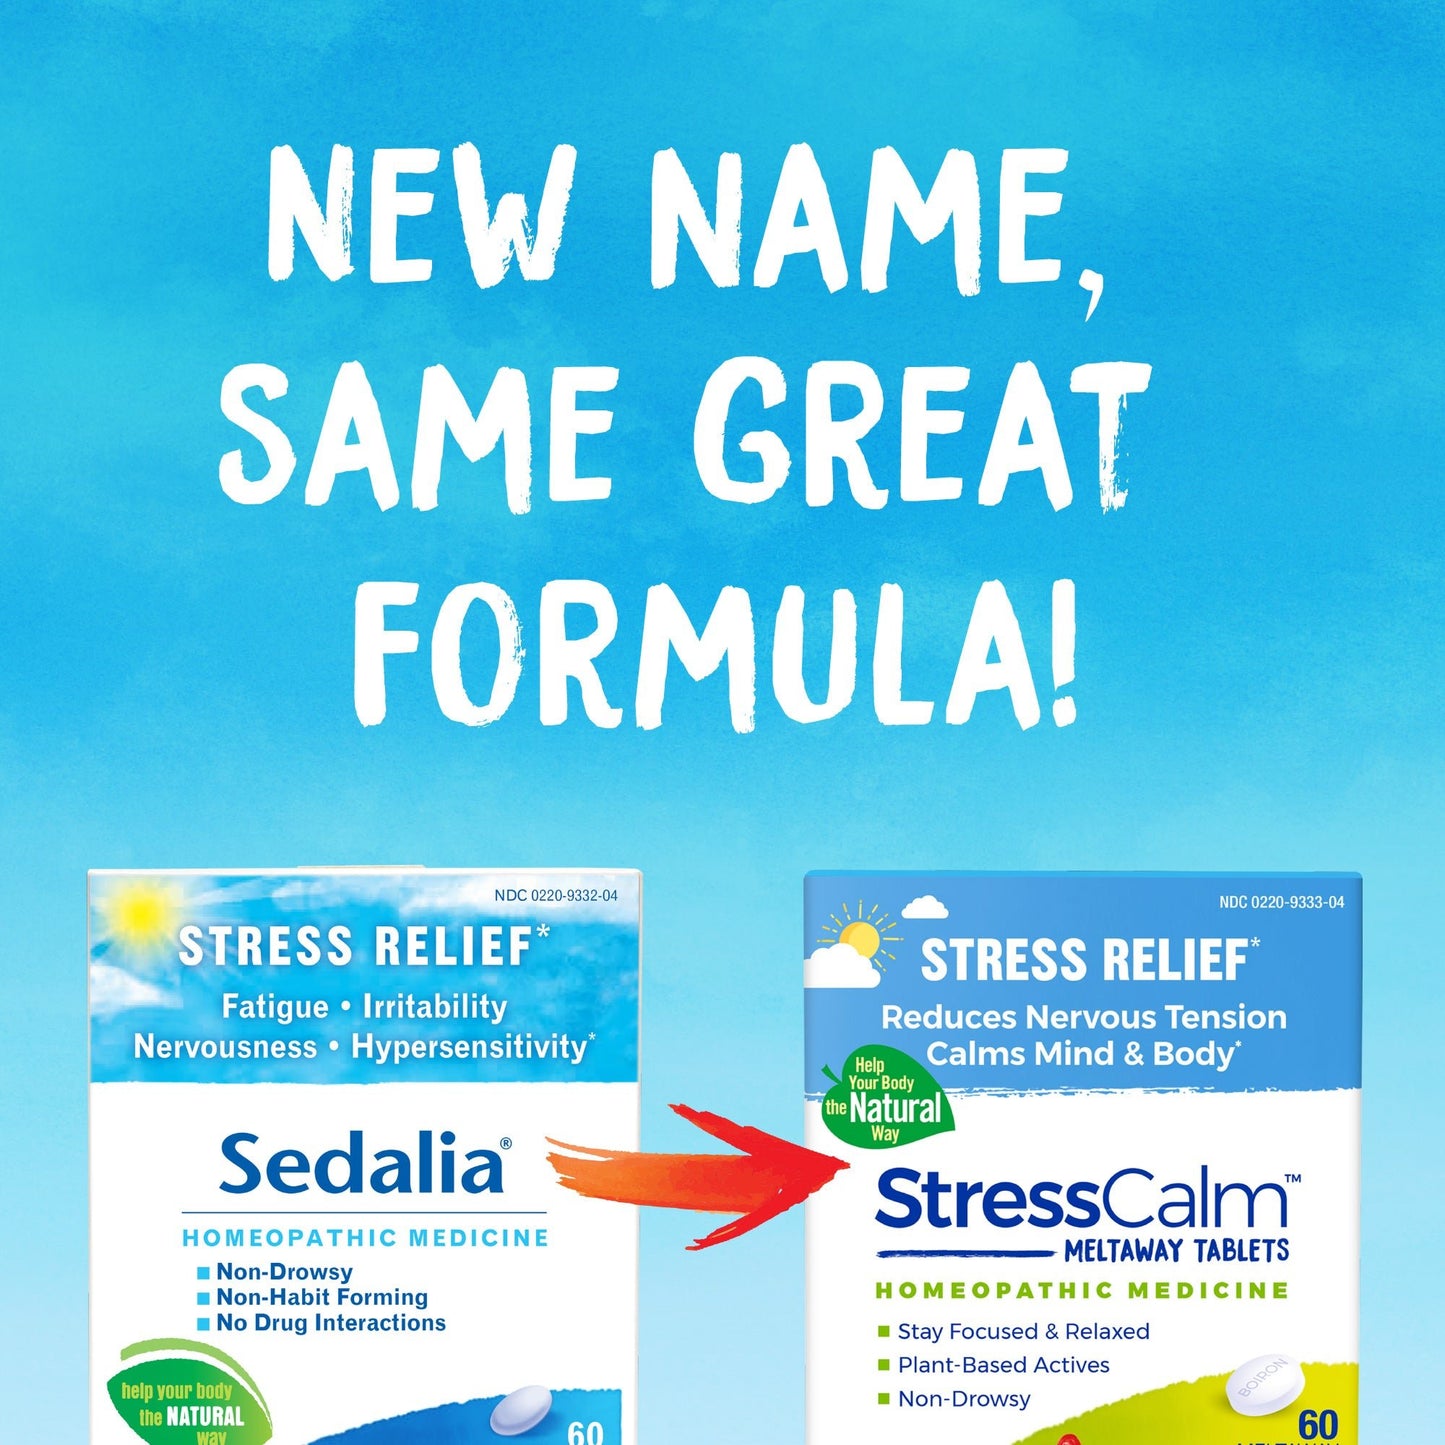 StressCalm™ Homeopathic Anxiety Stress Relief - One Life Natural Market NC